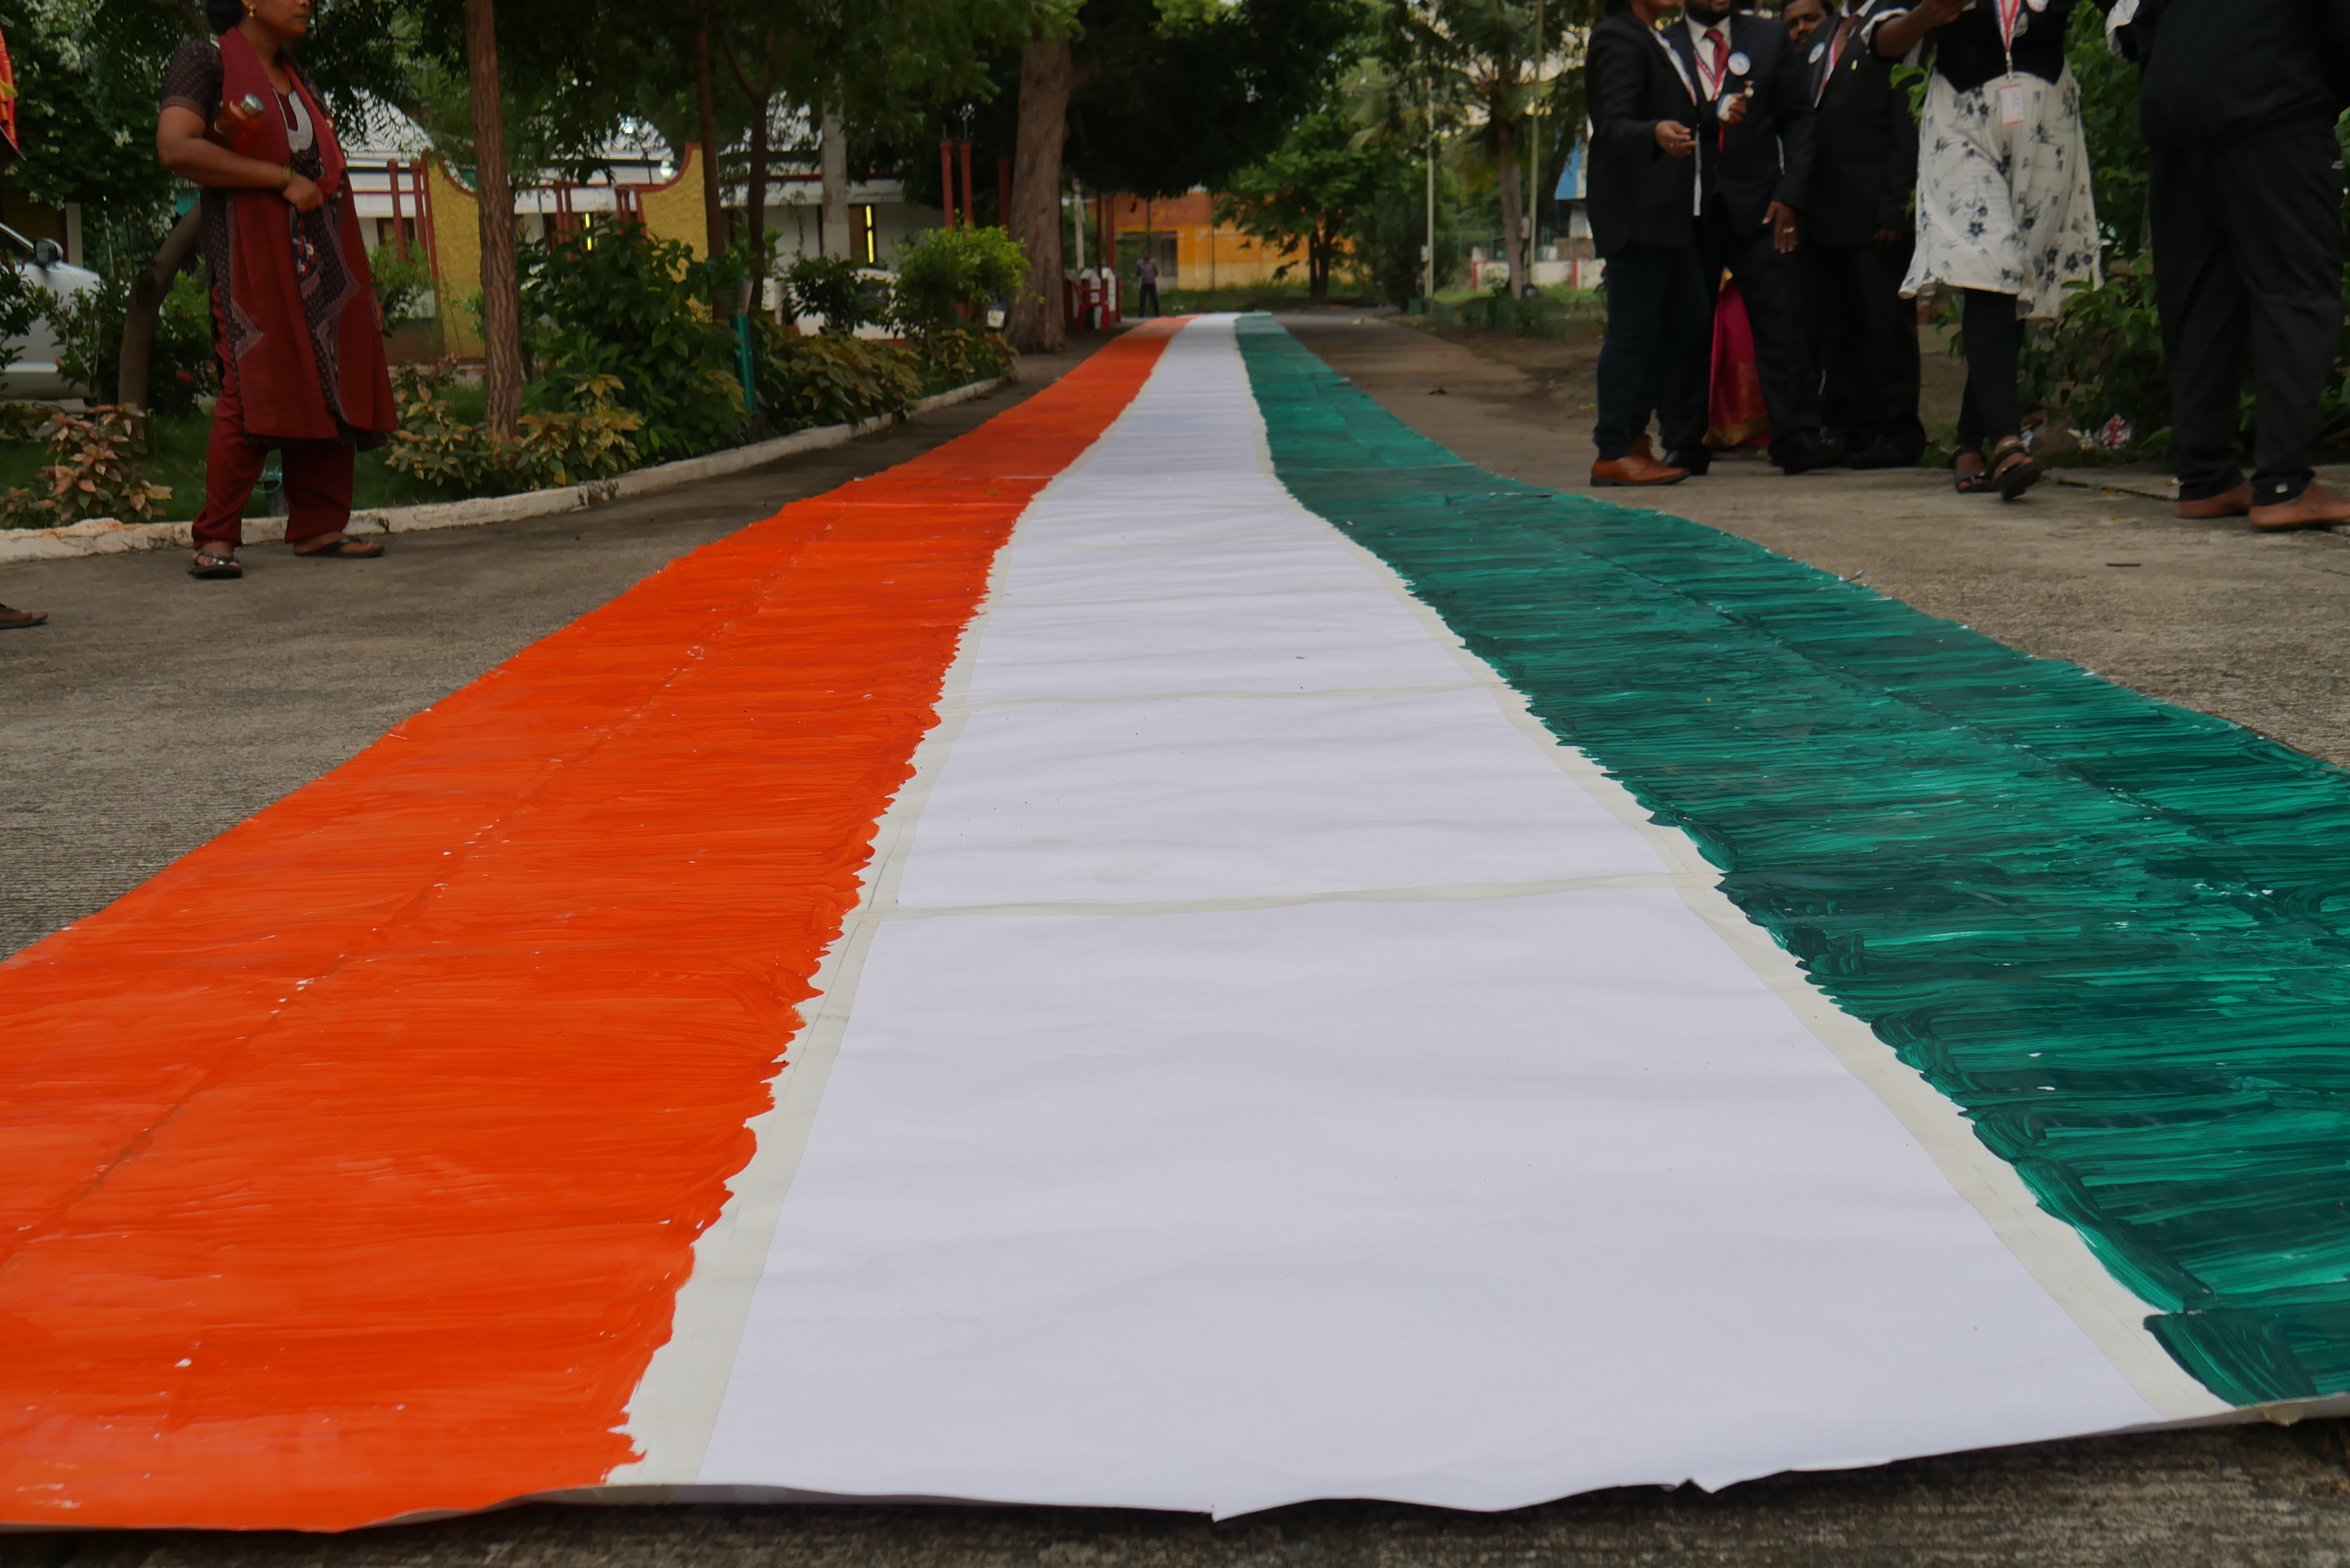 THE FIRST PERSON IN THE WORLD, TO DRAW THE LONGEST INDIAN NATIONAL FLAG  NON-STOP FOR 49 HOURS USING HIS TONGUE ONLY